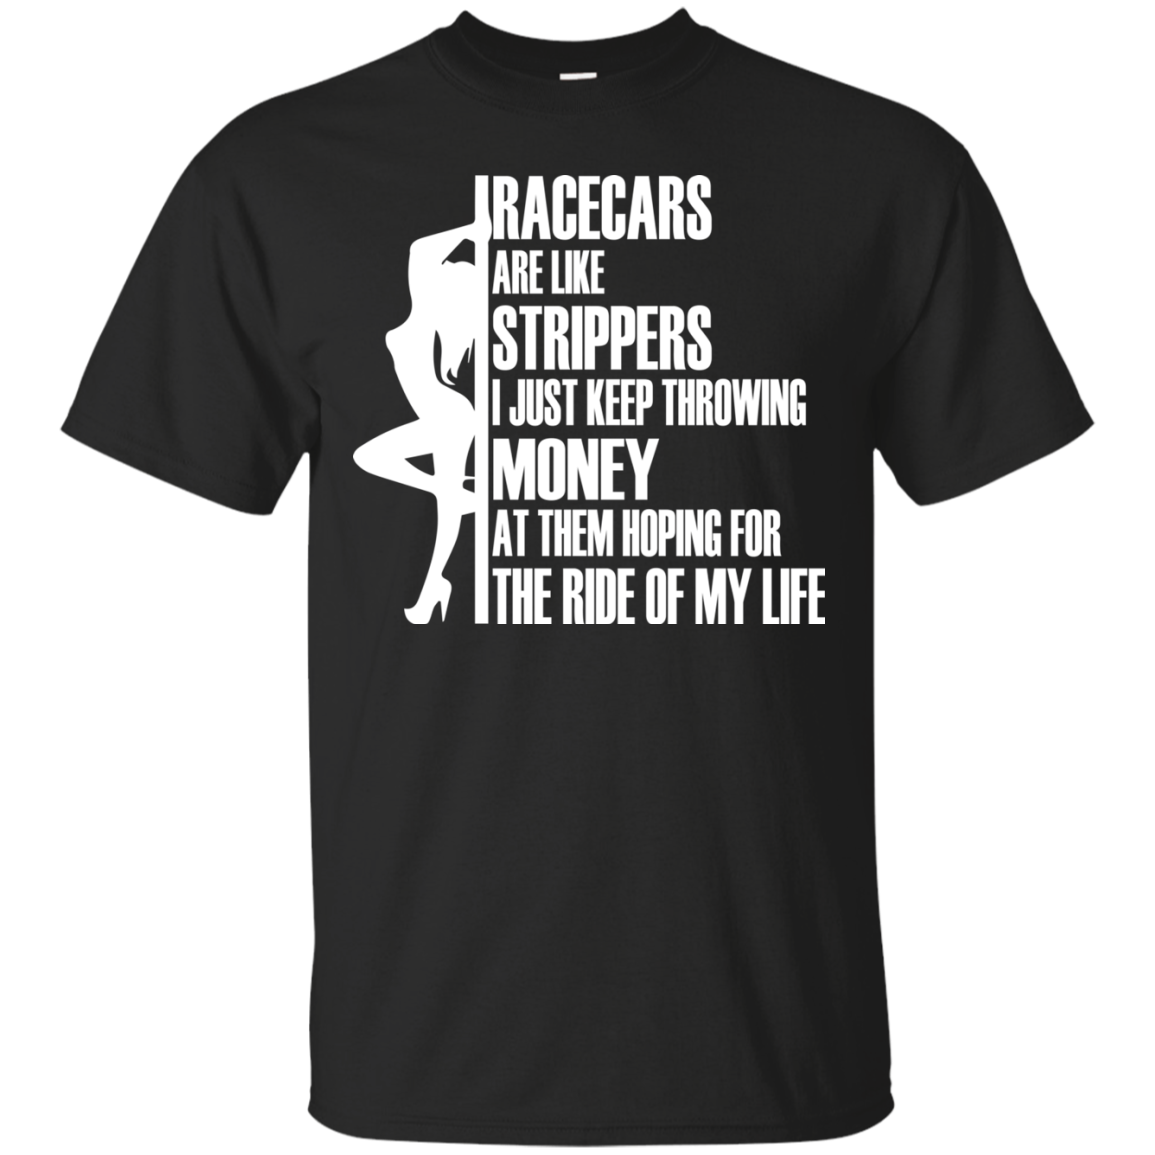 Racecars Are Like Strippers - I Just Keep Throwing Money Shirt